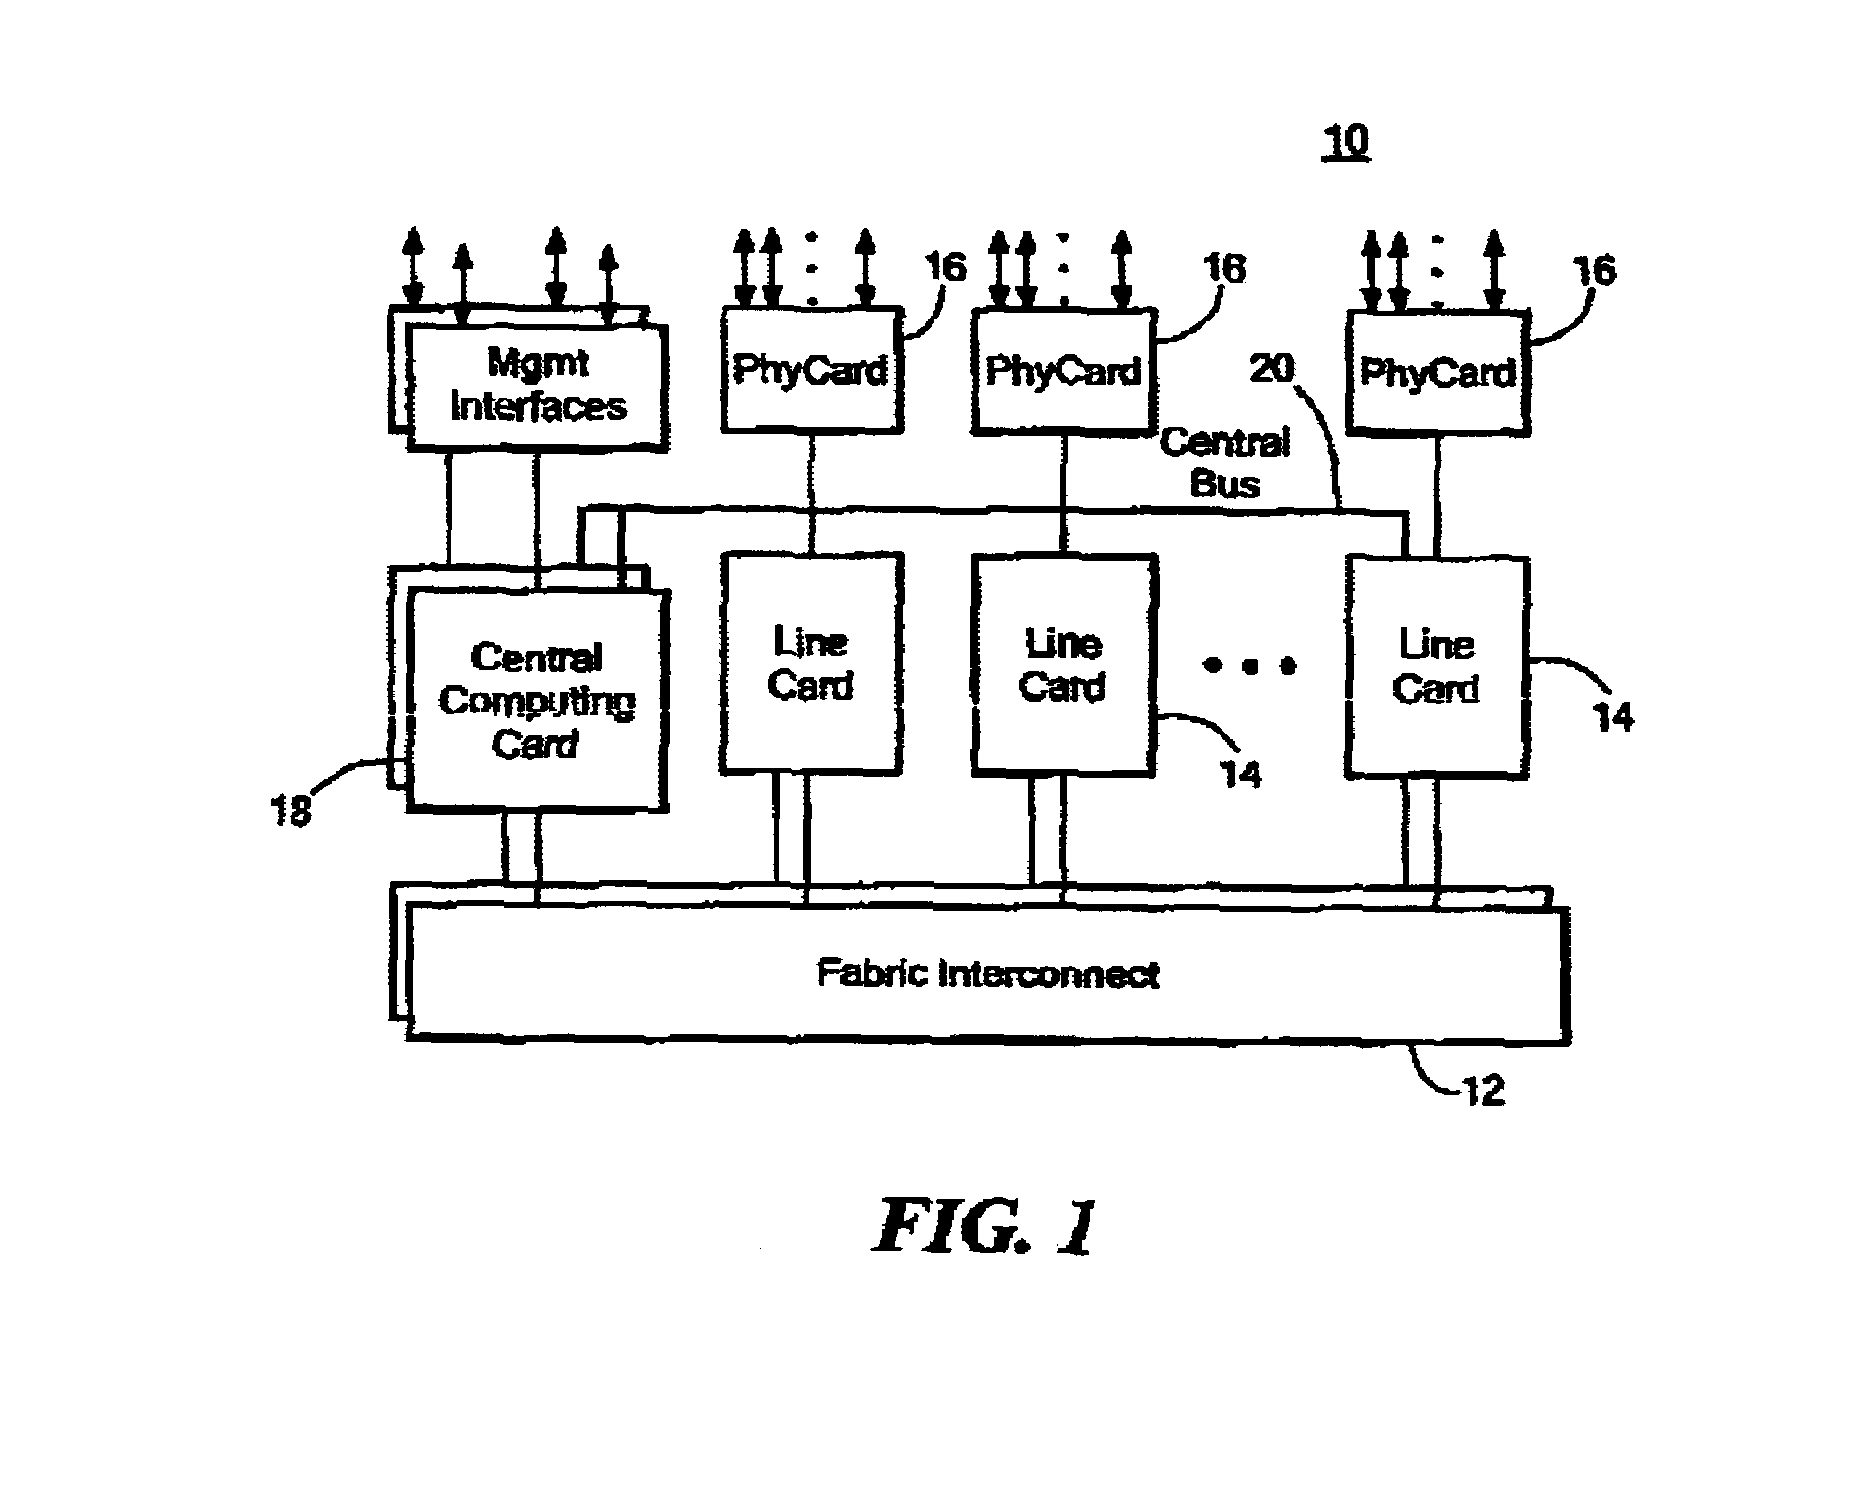 Mechanism for automatic protection switching in a router